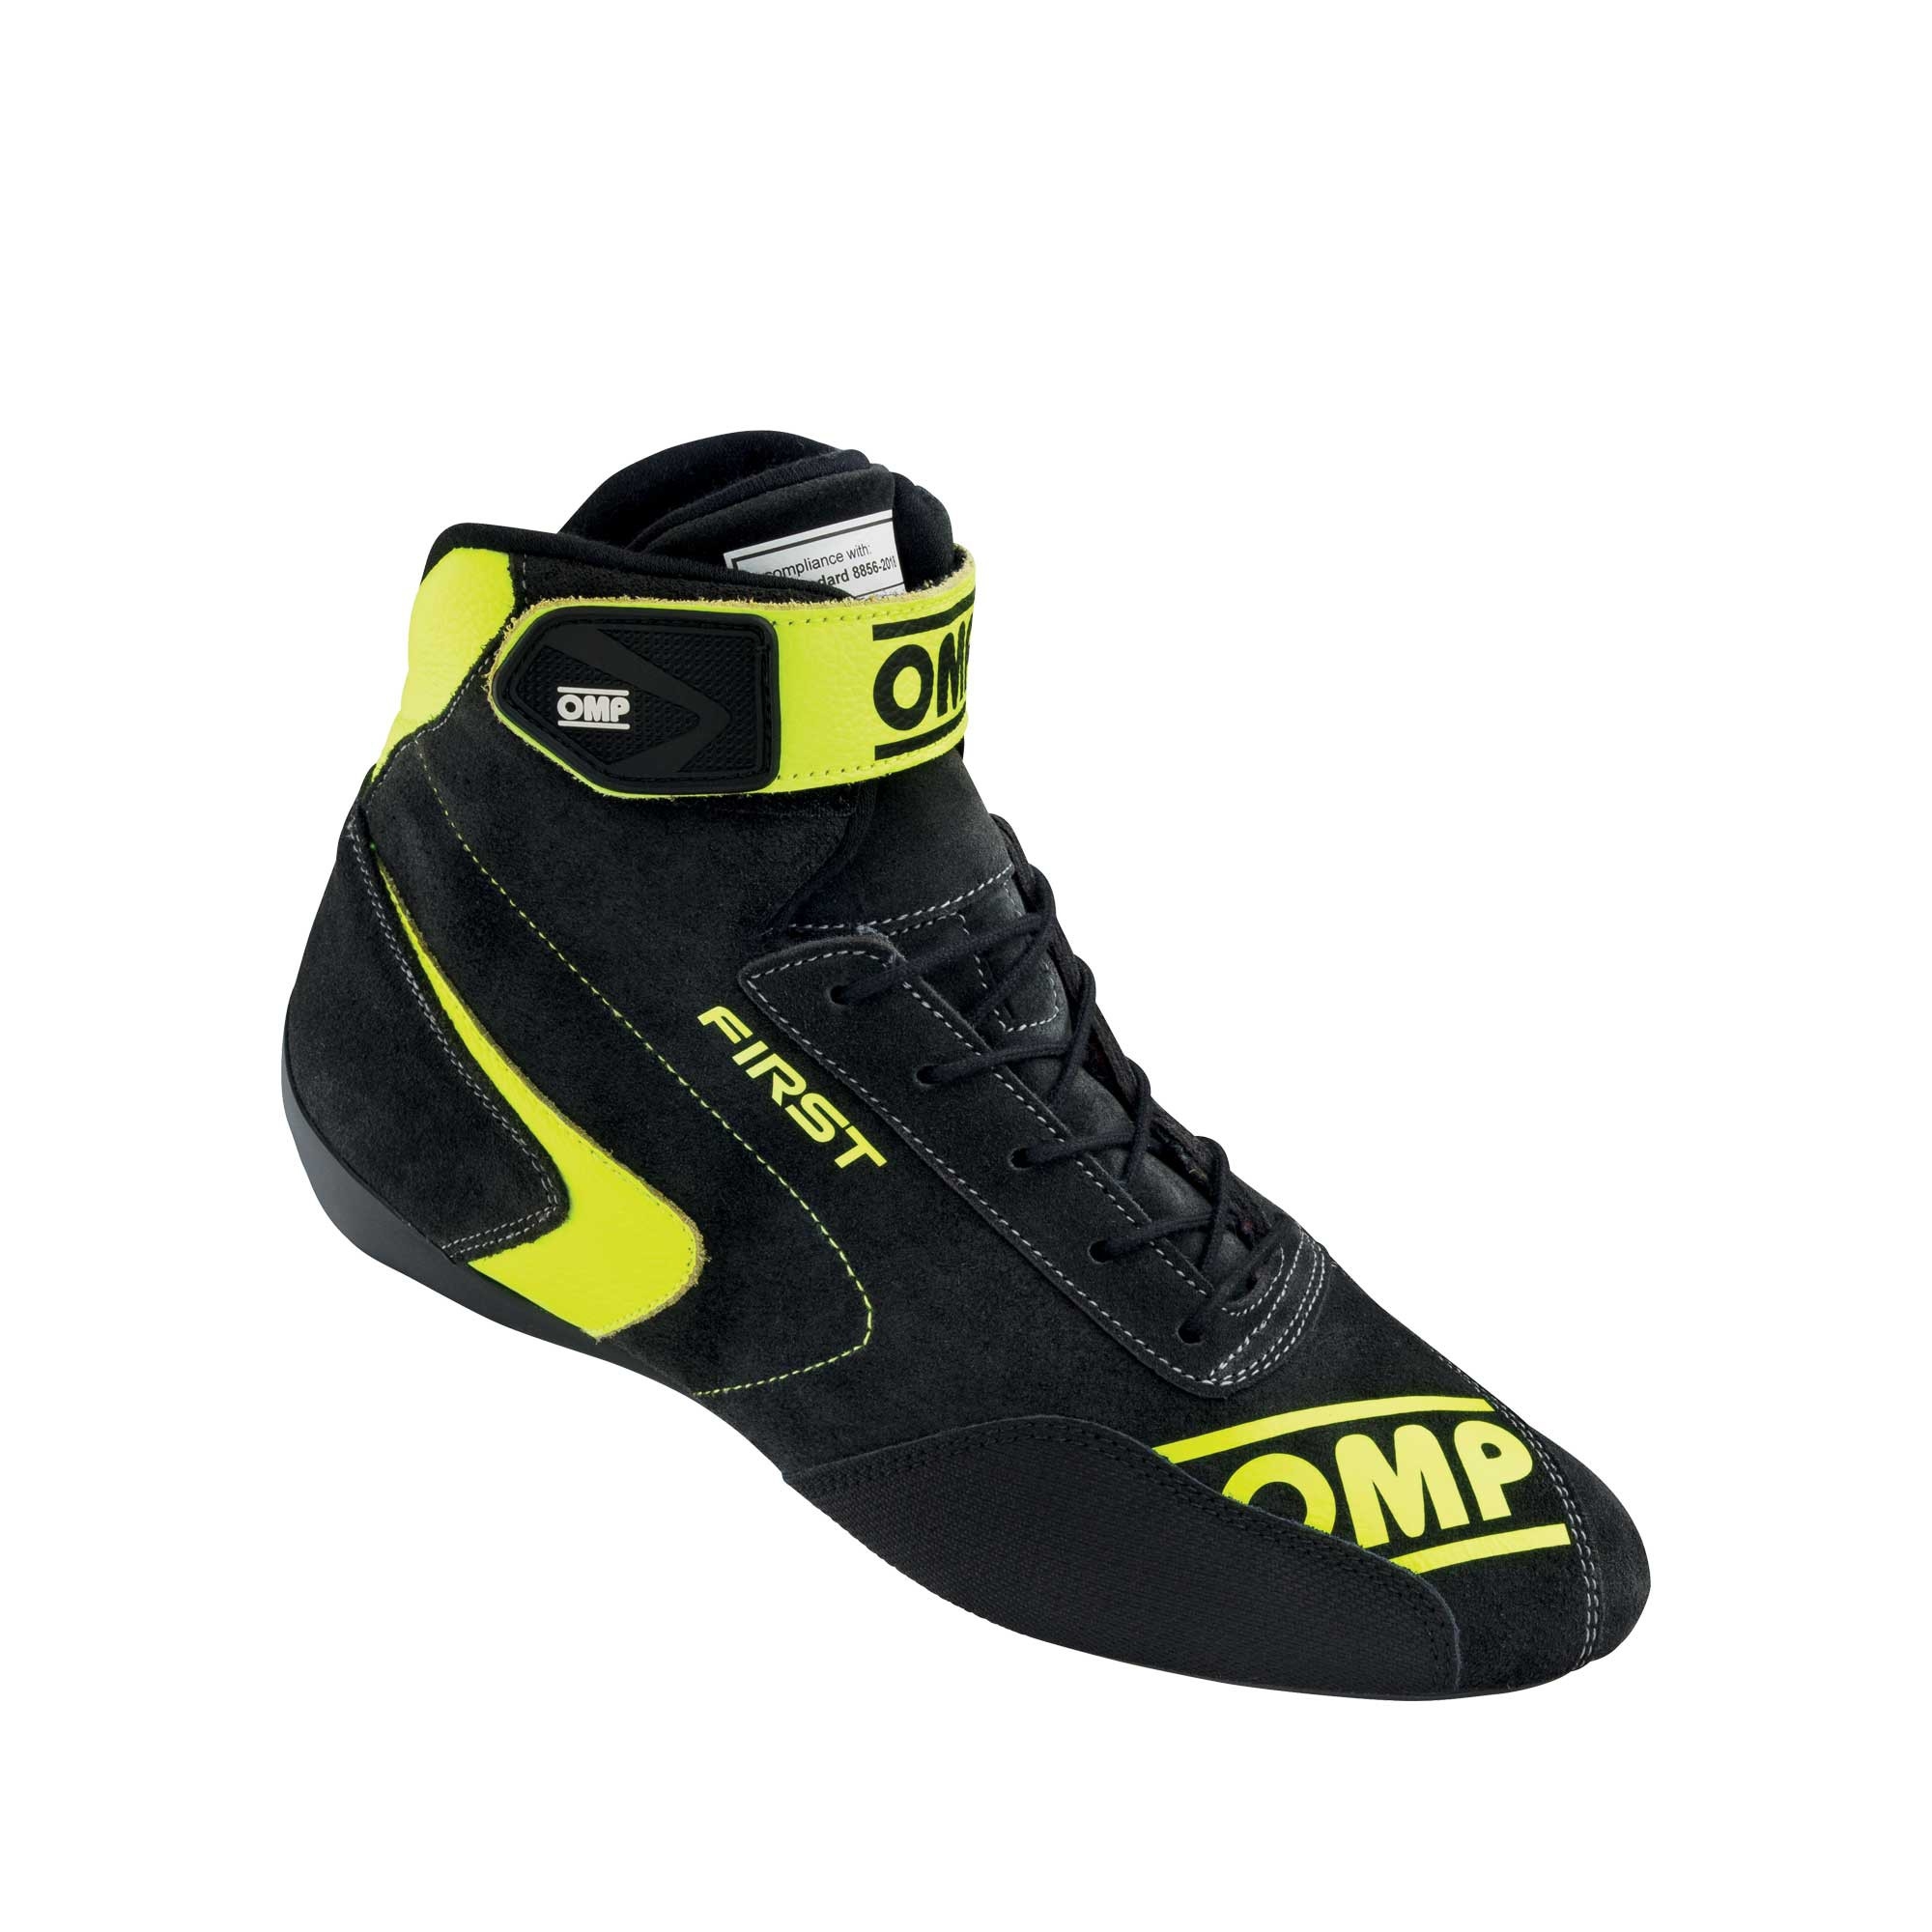 OMP First Race Shoe my2020